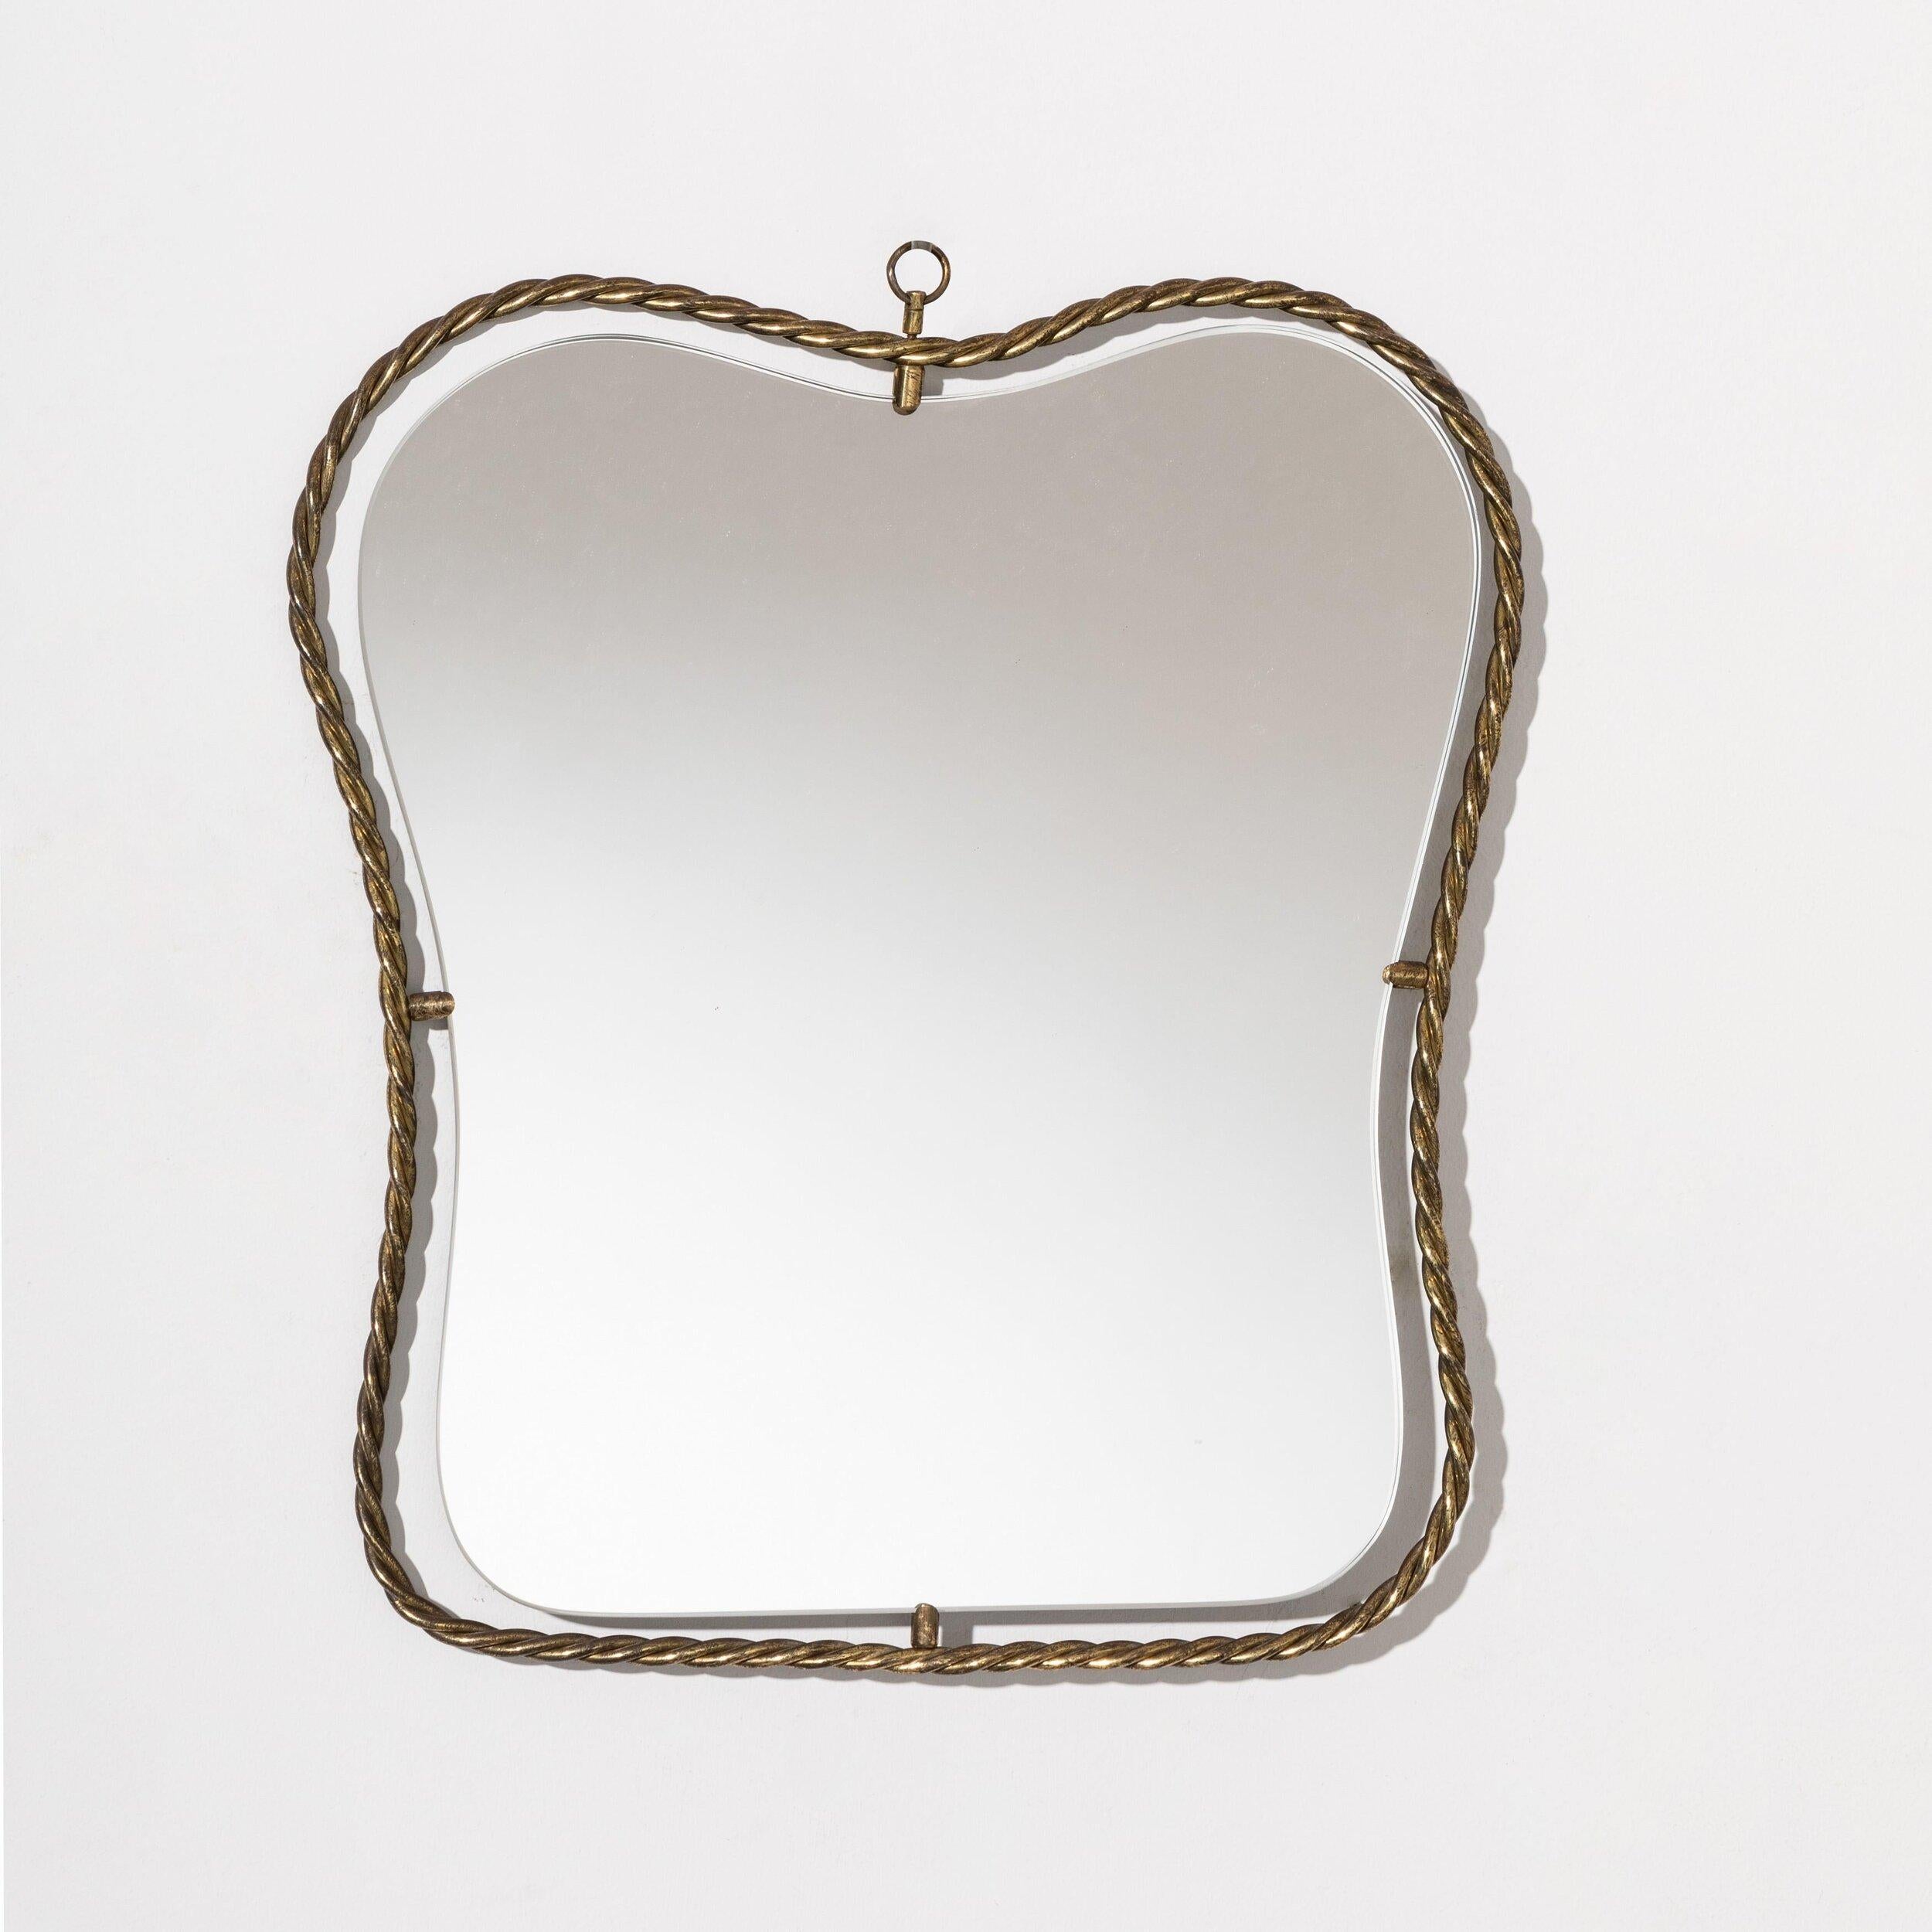 A small organic wall mirror, produced in Italy, 1950s. Organically cut mirror glass is framed in ribbon-shaped brass.

Other designers of the period include Gio Ponti, Fontana Arte, Max Ingrand, Franco Albini, and Josef Frank.